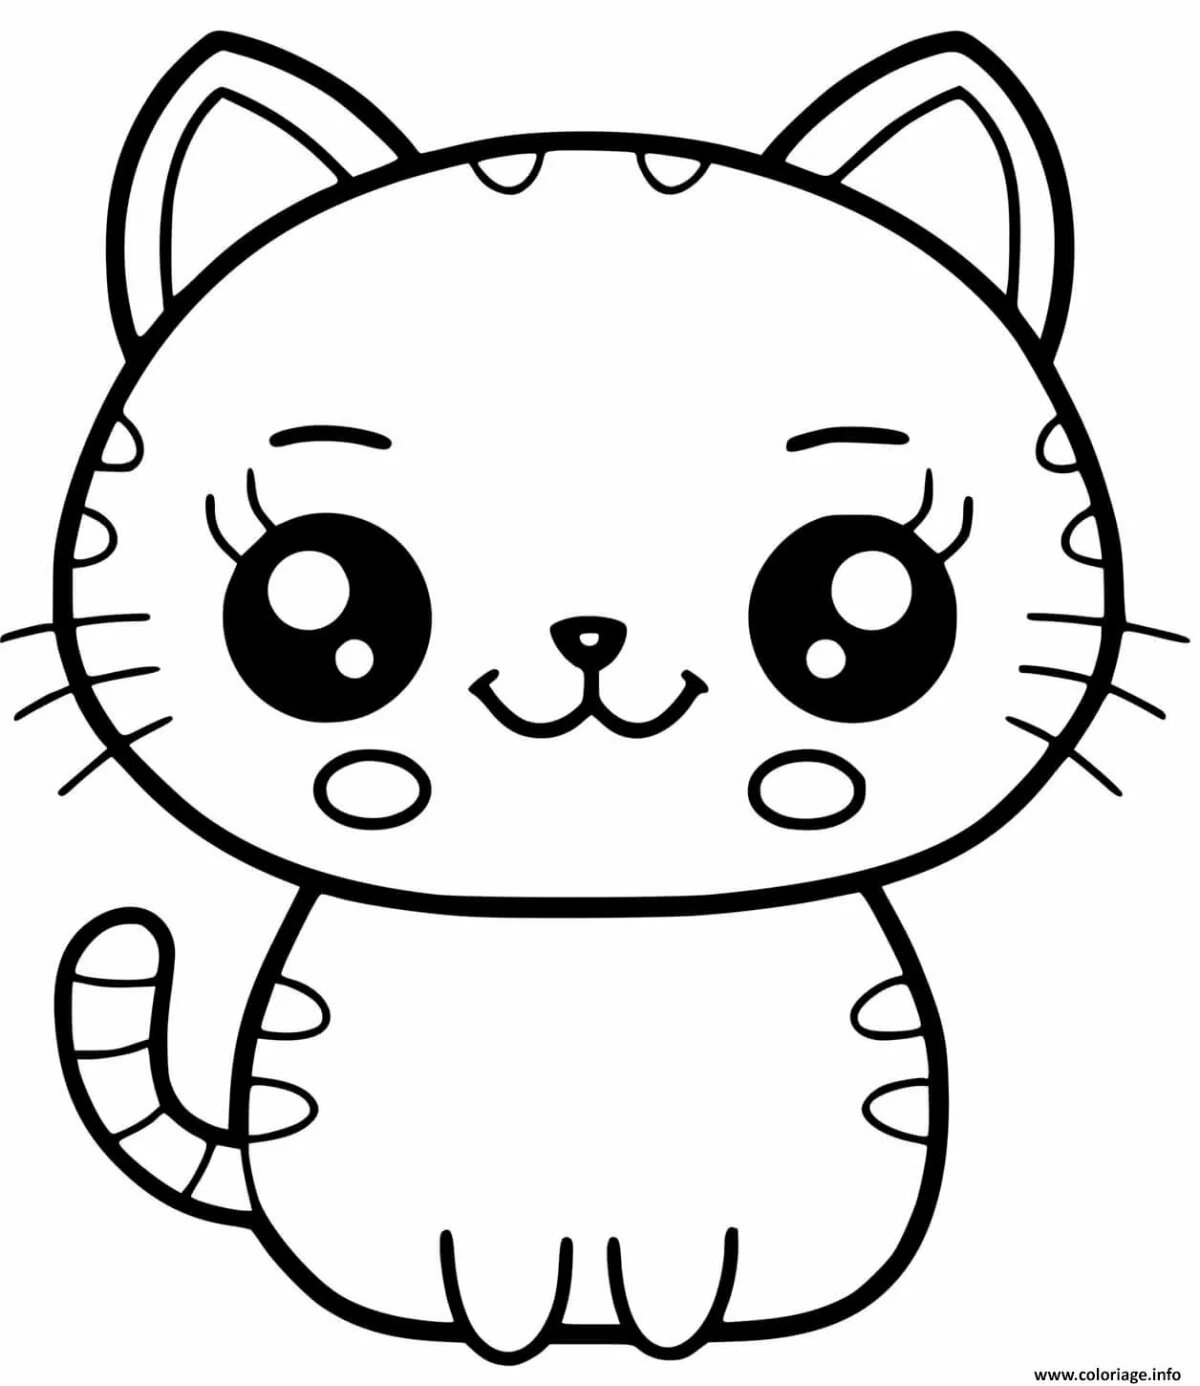 Colouring Whiskery the cutest cat